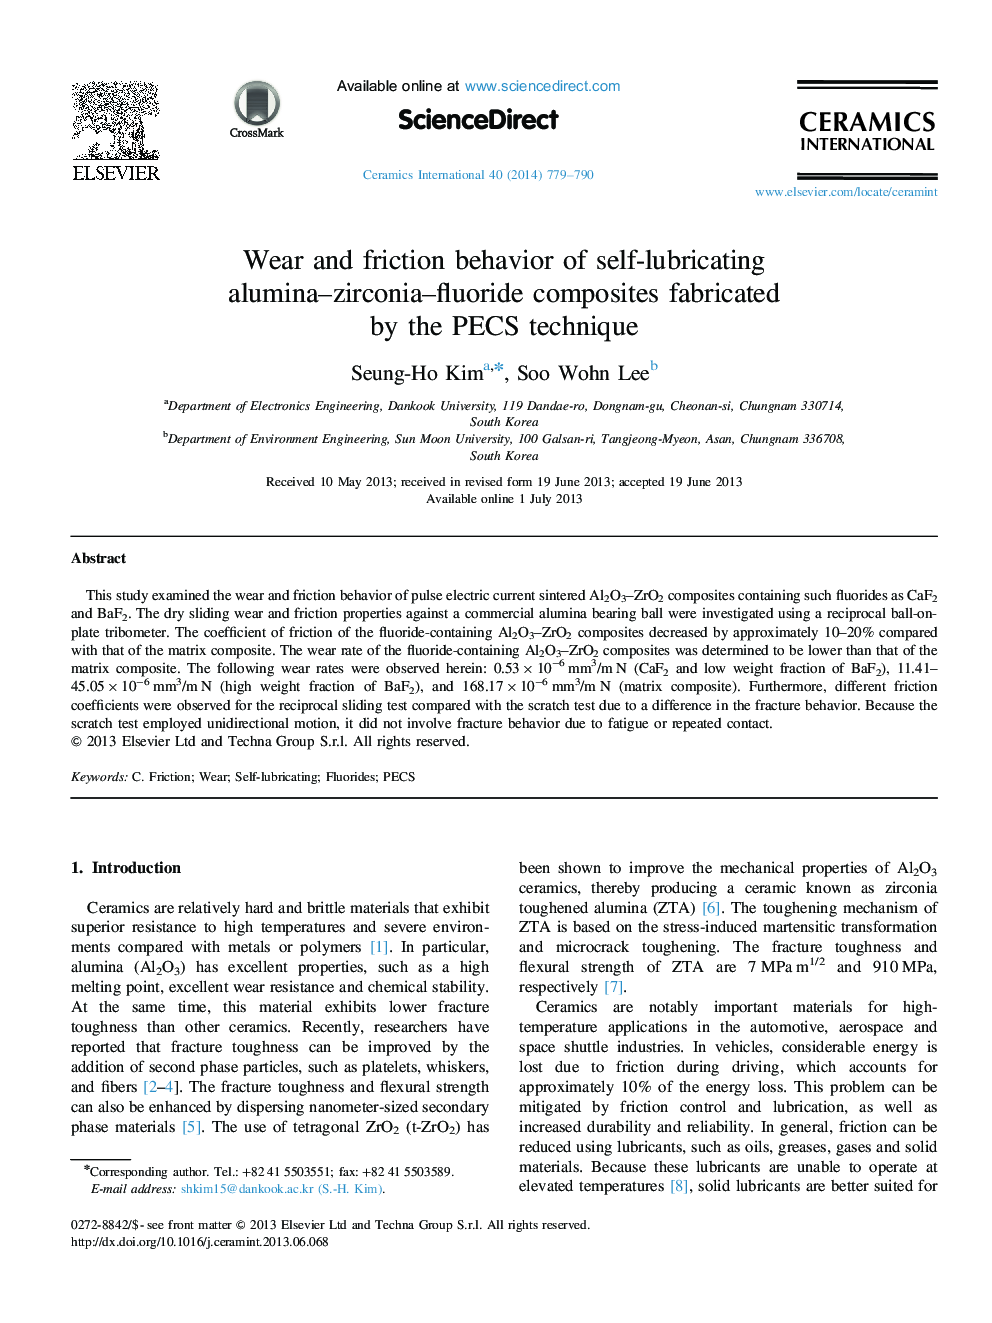 Wear and friction behavior of self-lubricating alumina–zirconia–fluoride composites fabricated by the PECS technique